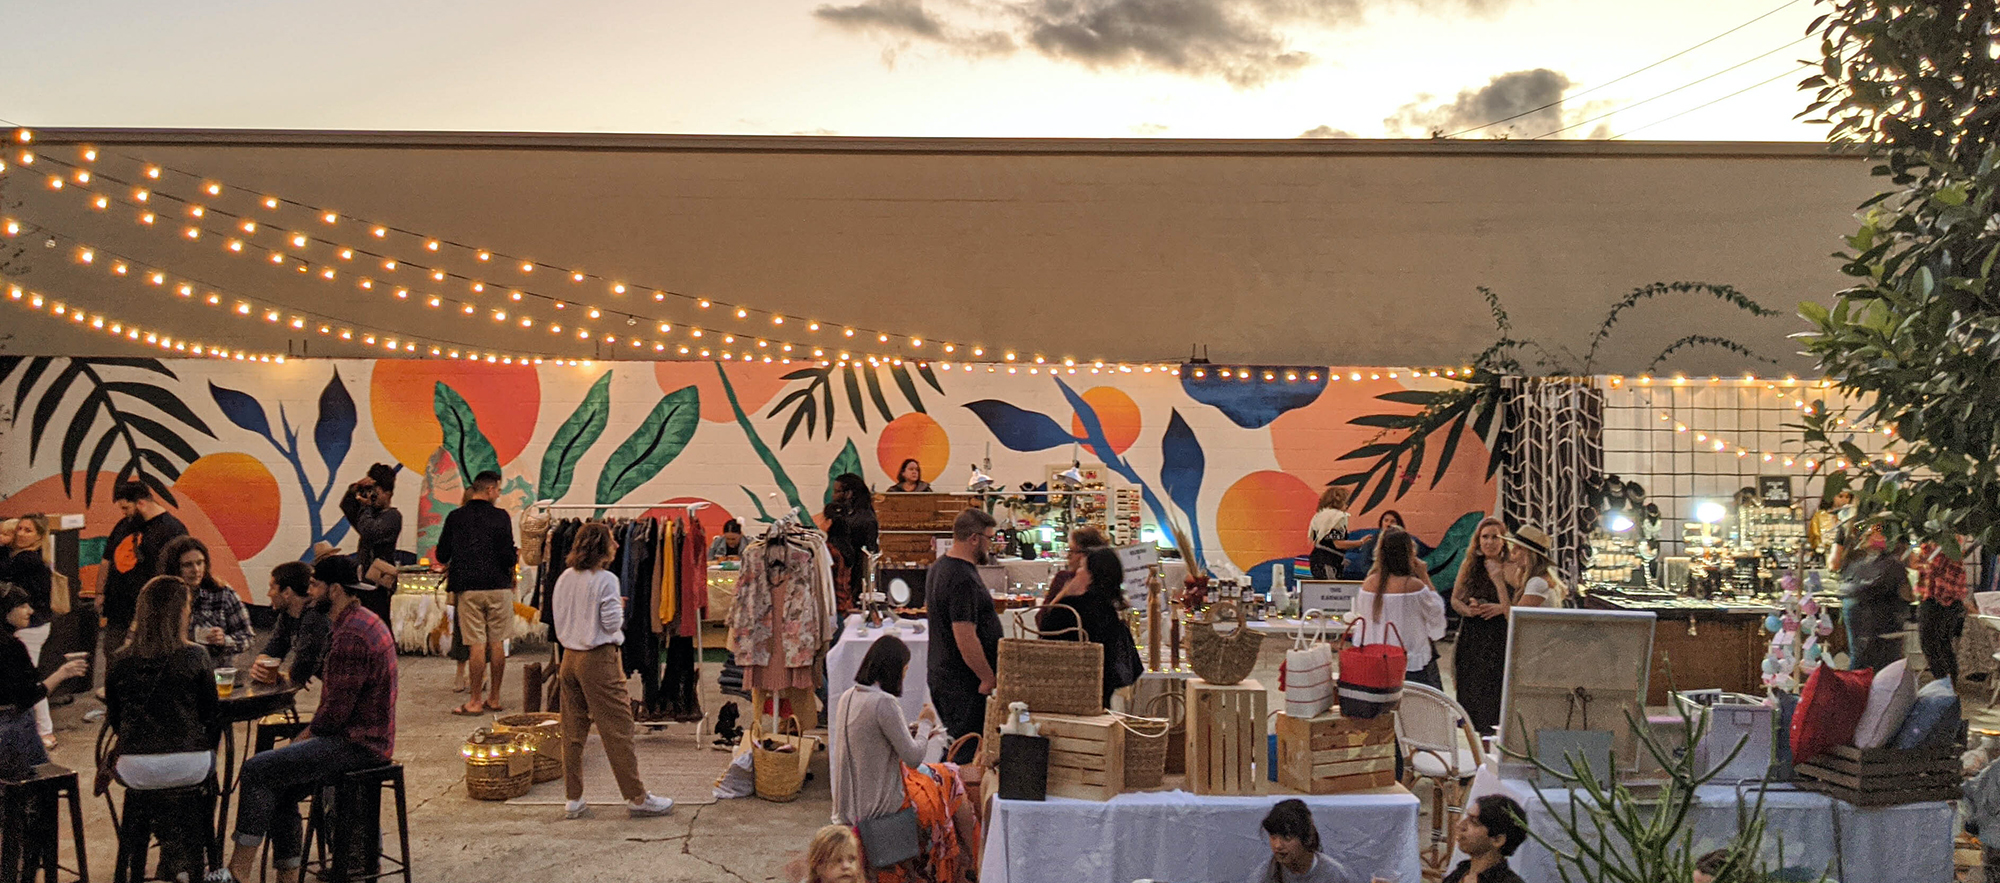 Crowd of party-goers in front of a bright and colorful botanical mural done by Melissa Deckert at Elizabeth Ave Station's pop-up event in West Palm Beach, FL.